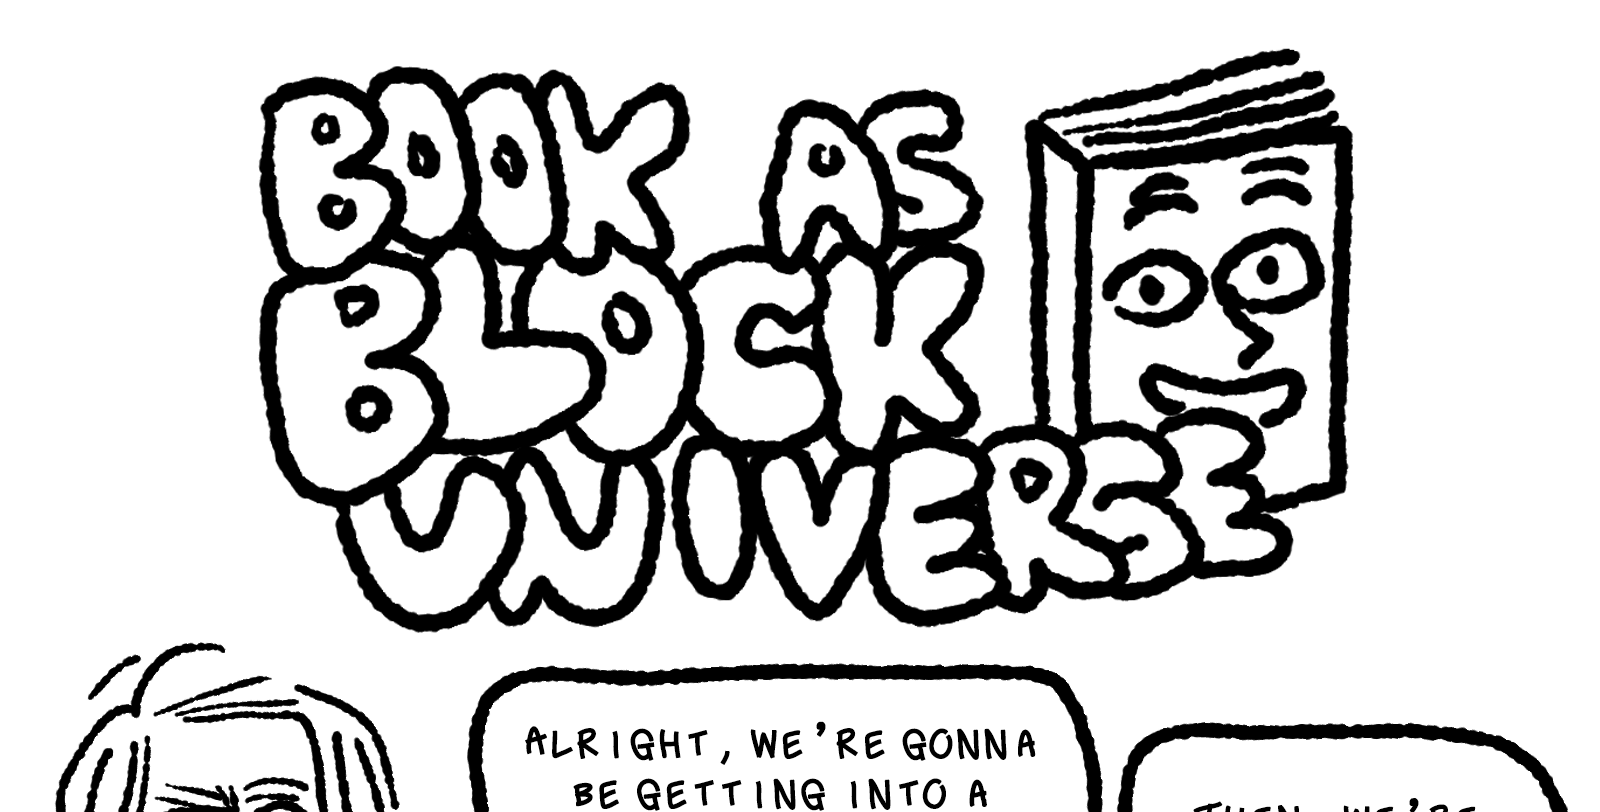 Big bubble letters read, BOOK AS BLOCK UNIVERSE. To the right of the title is a book with Elk's face on the cover